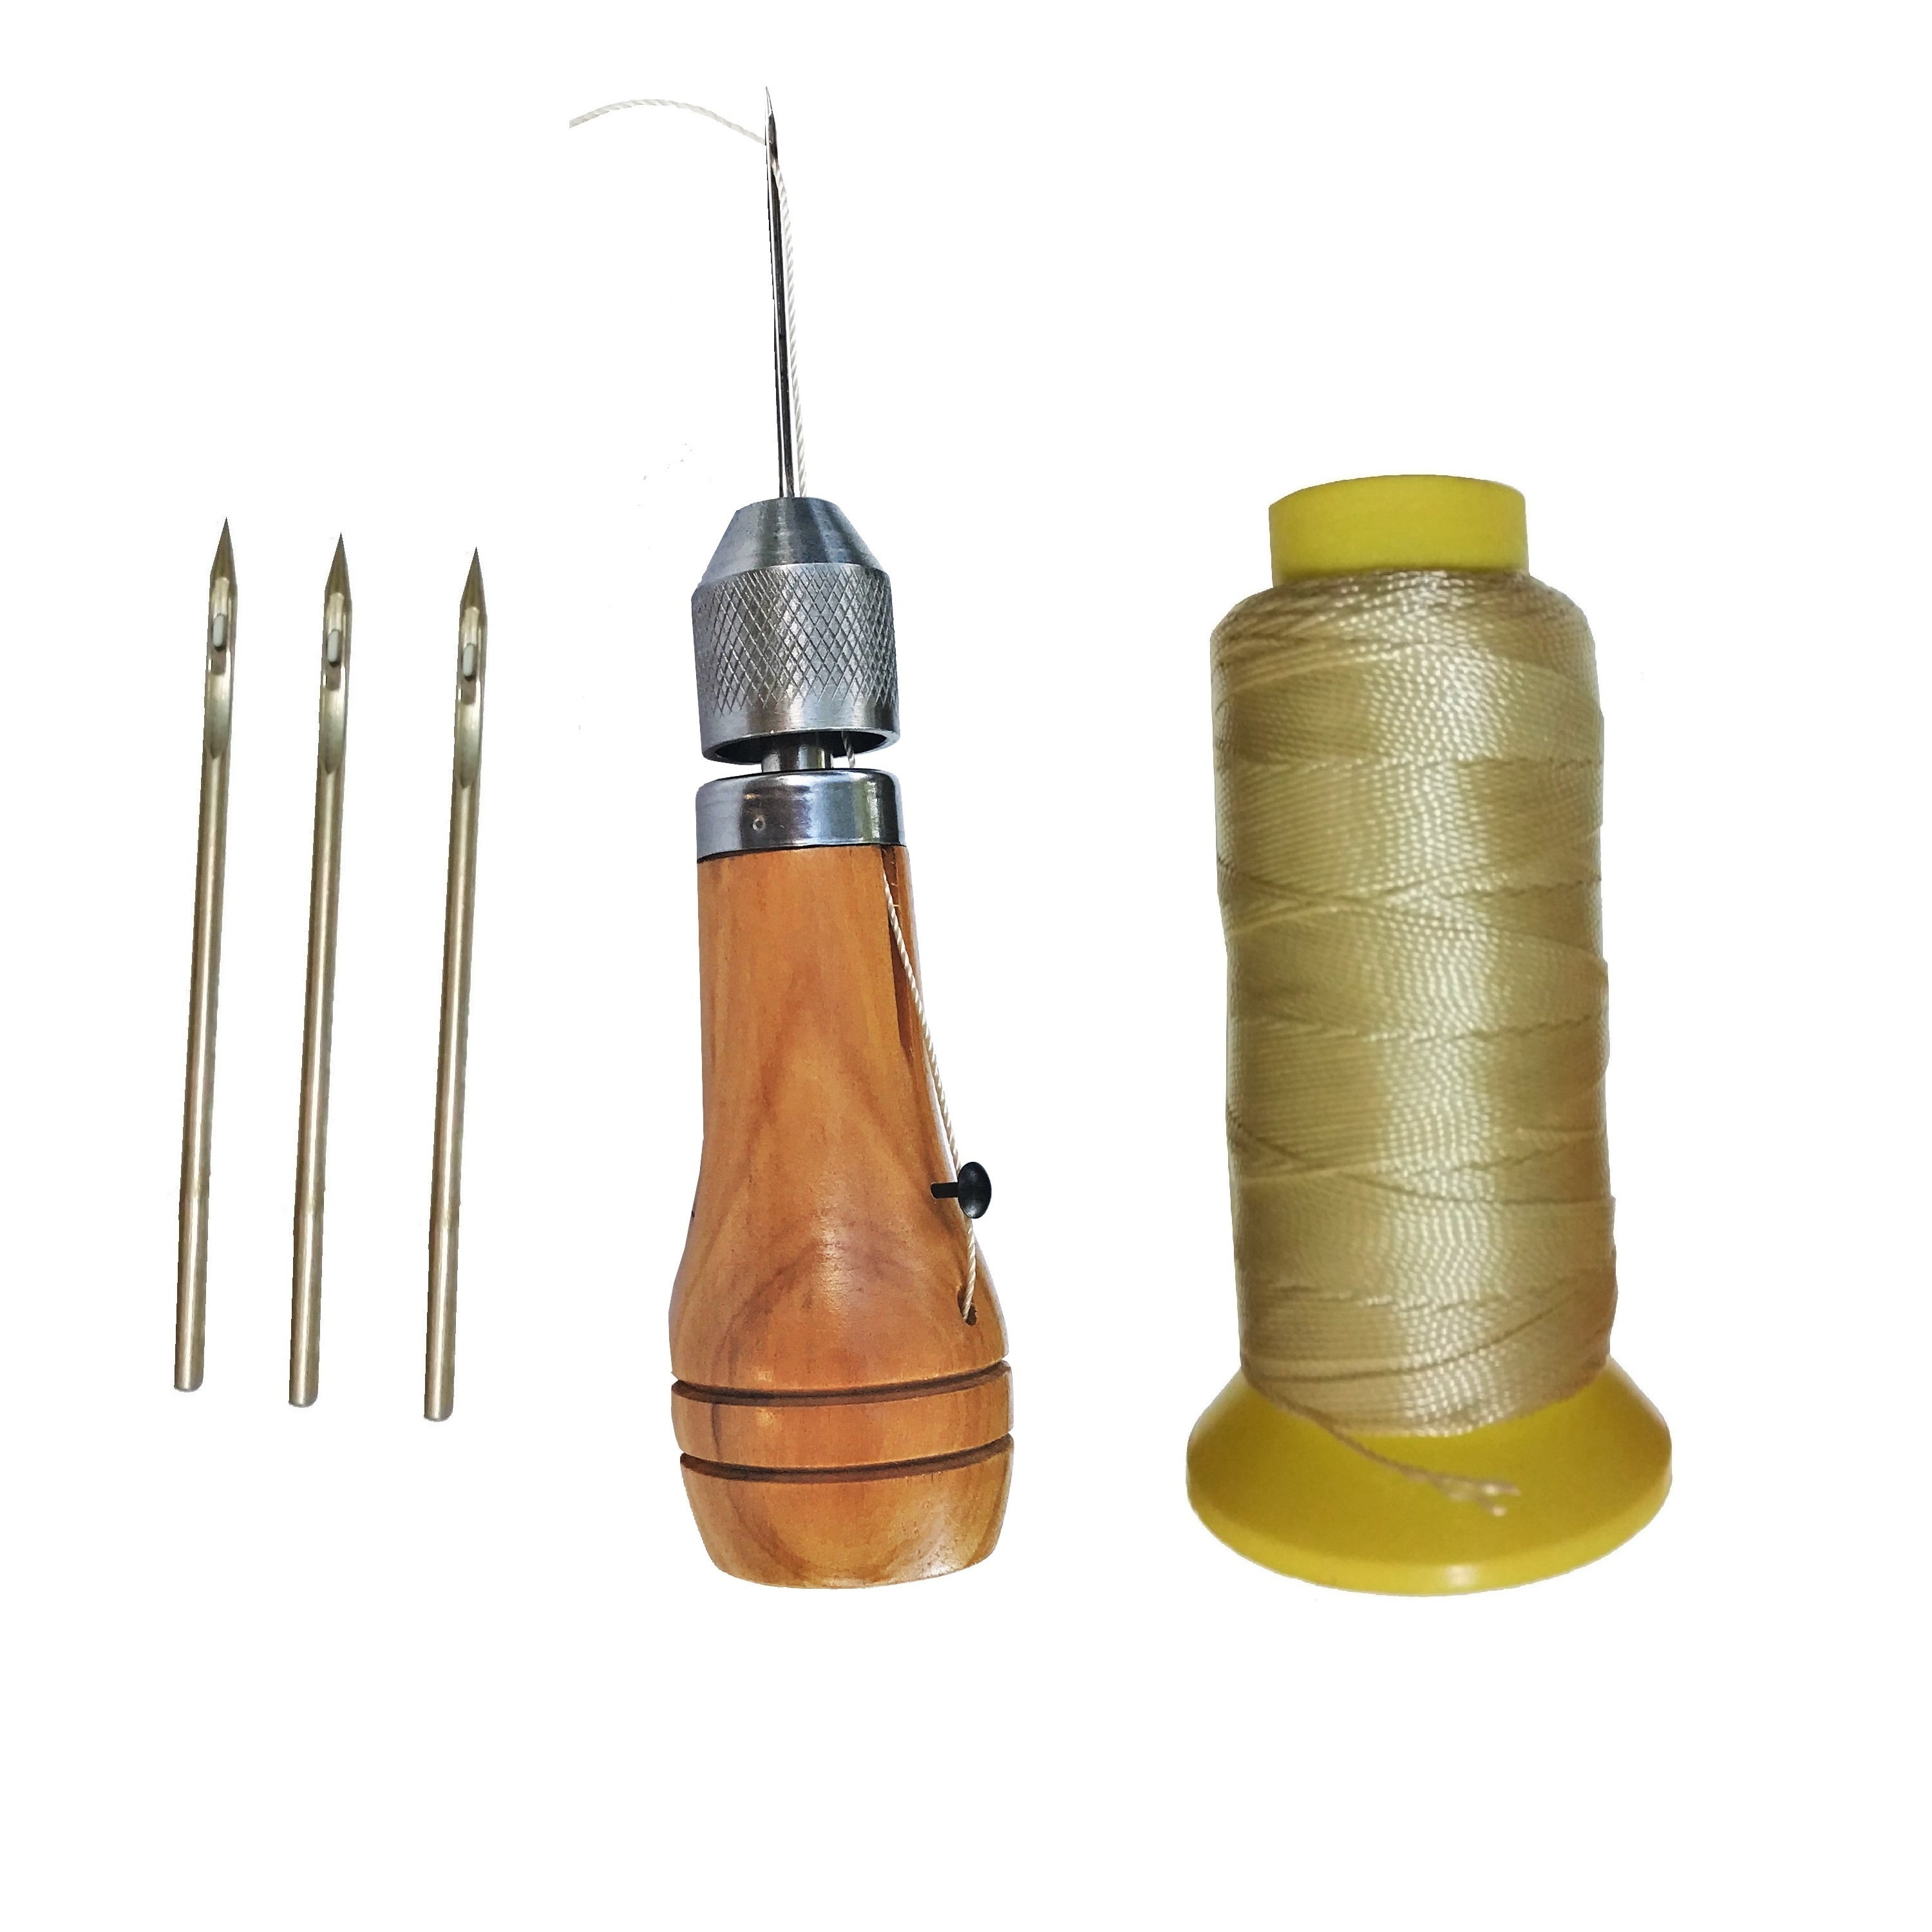  Orenic Leather Sewing Awl Needle Kit - DIY Hand Stitching Tools  Accessory for Repairing Tent Backpack - Sewing Awl, Stitching Awl, Leather  Sewing Tools(Type B)